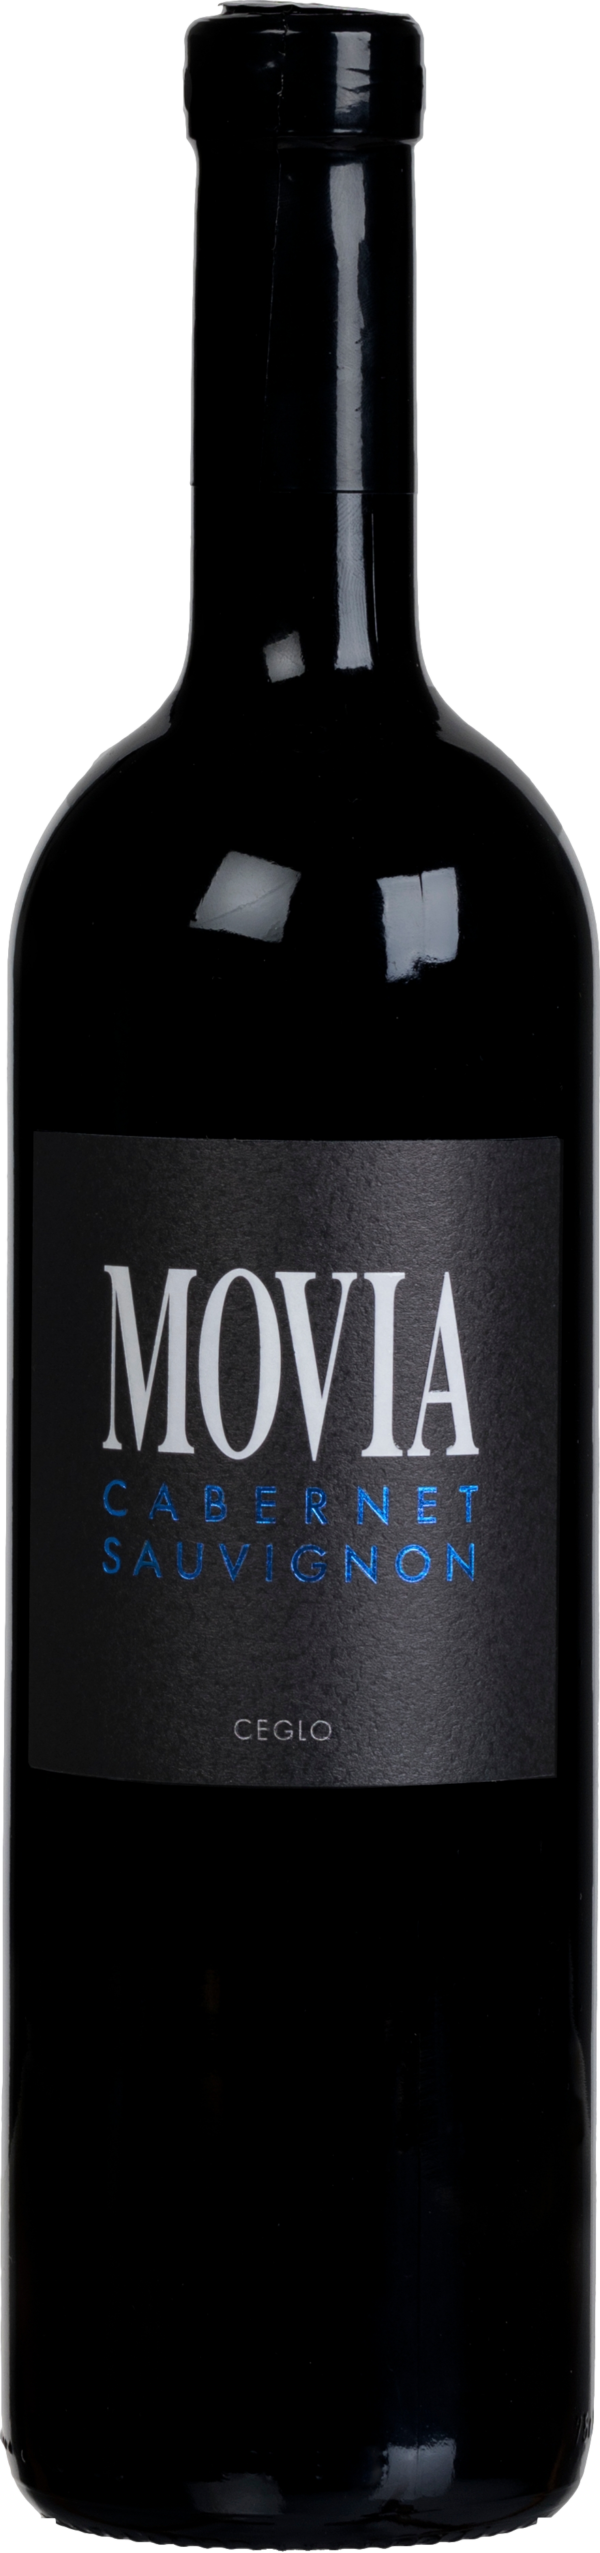 Product image of Movia Cabernet Sauvignon 2020 from 8wines